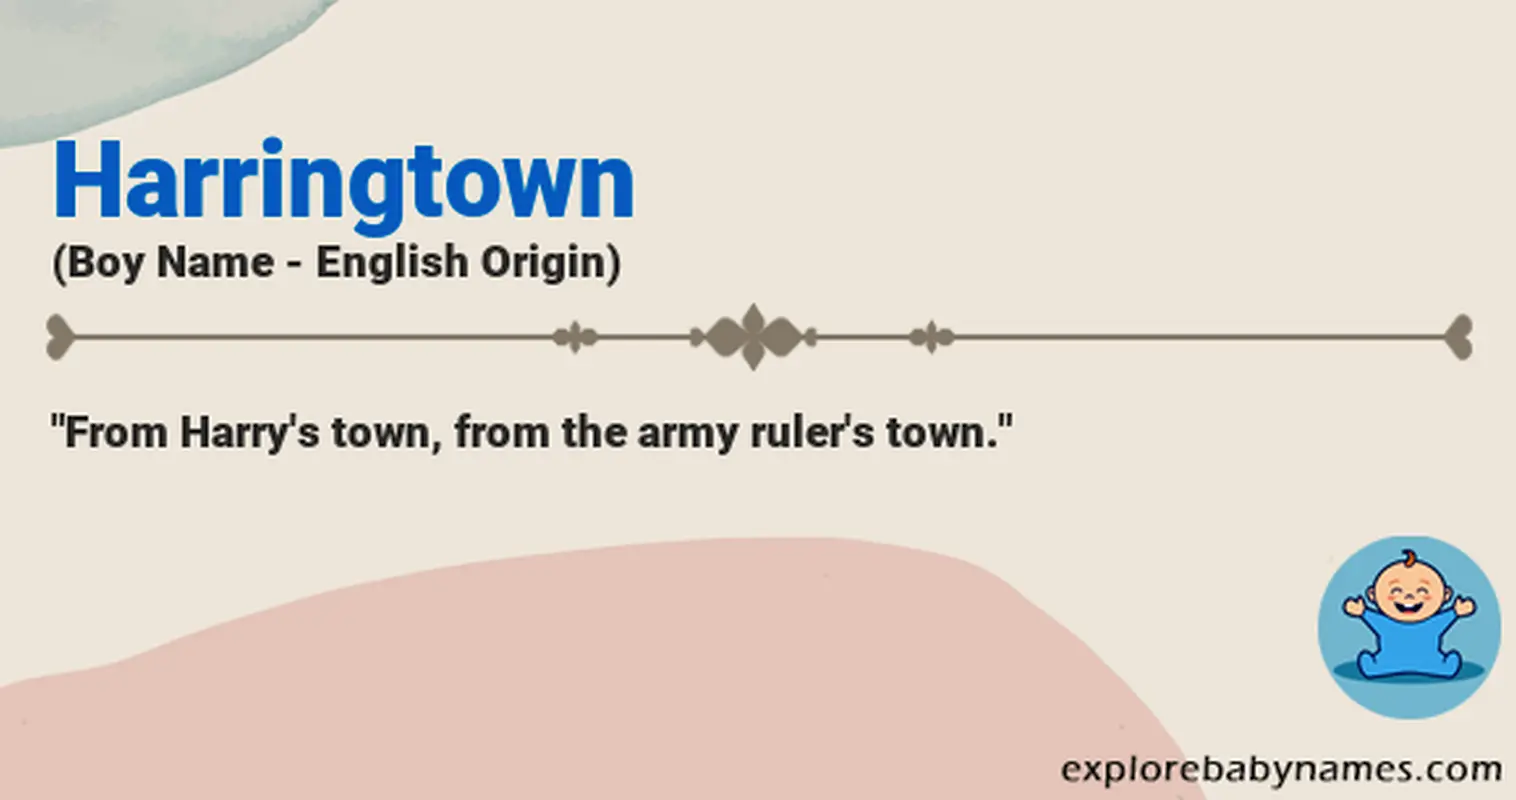 Meaning of Harringtown